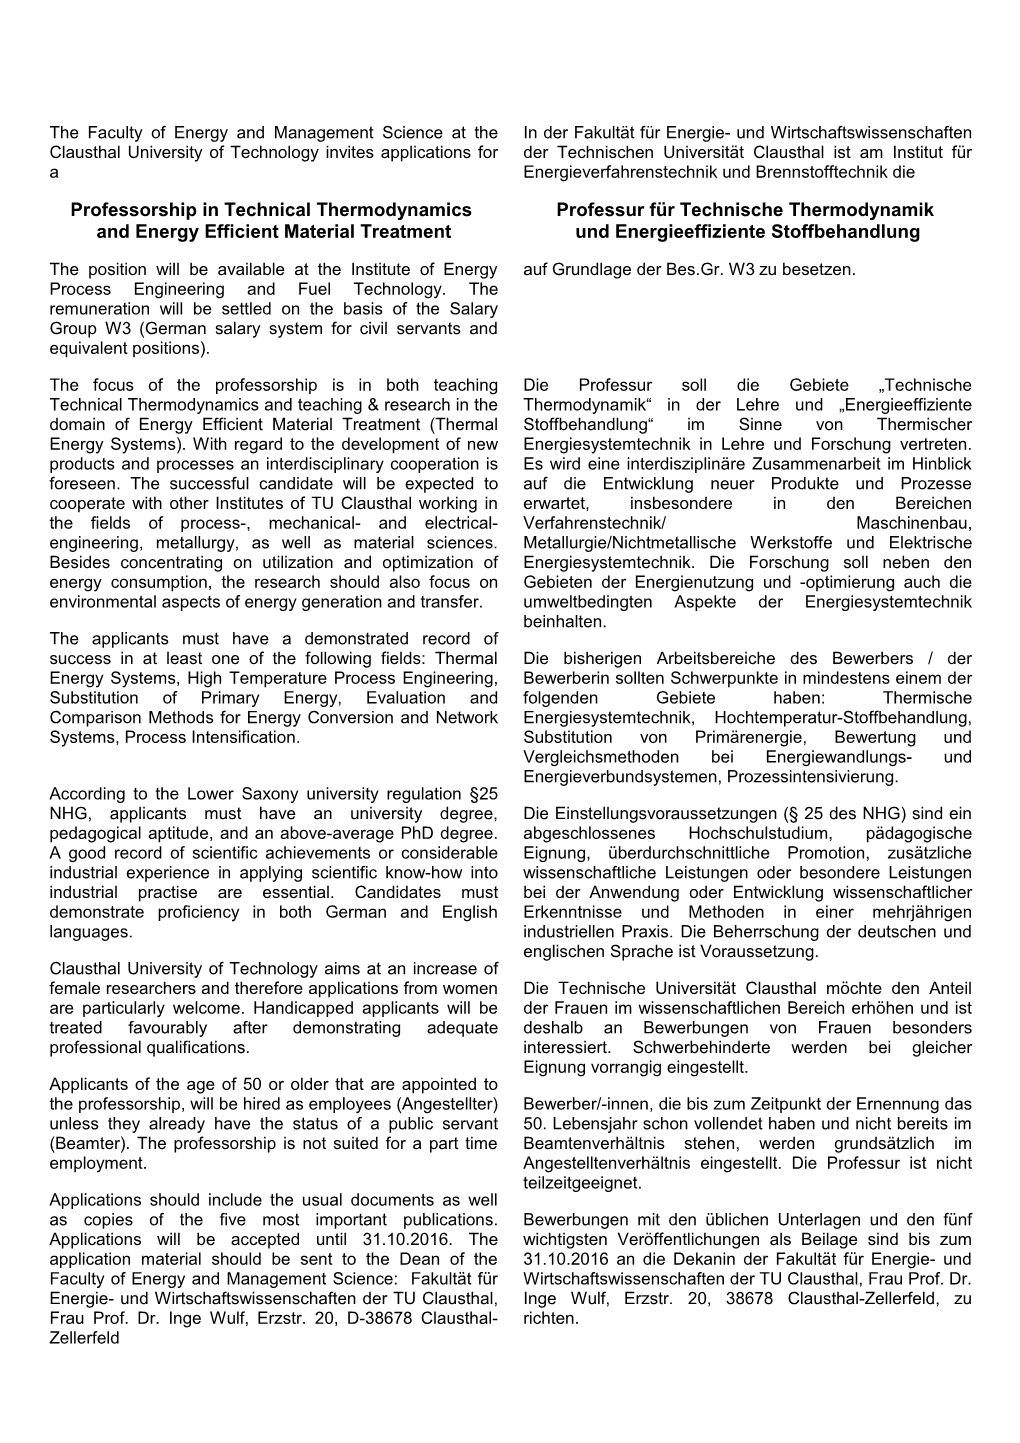 Professorship in Technical Thermodynamics and Energy Efficient Material Treatment